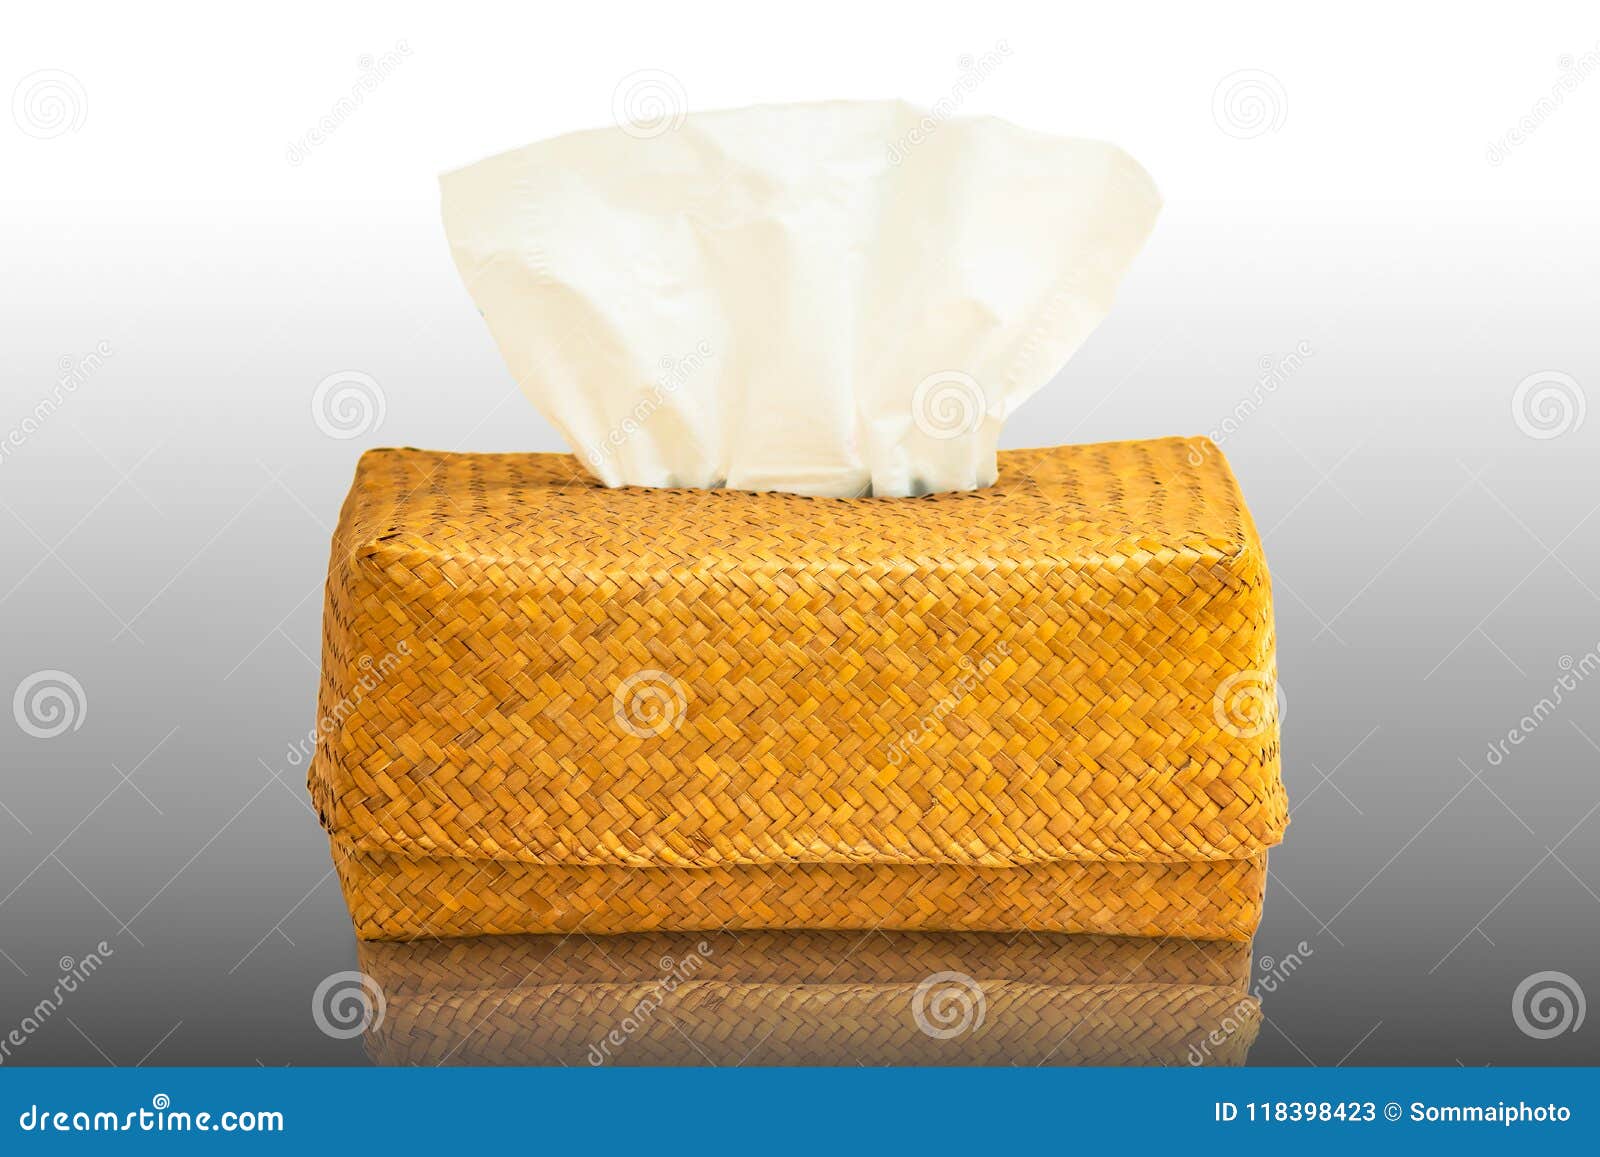 Download Tissue Box Mock Up White Tissue Box Blank Label And No ...